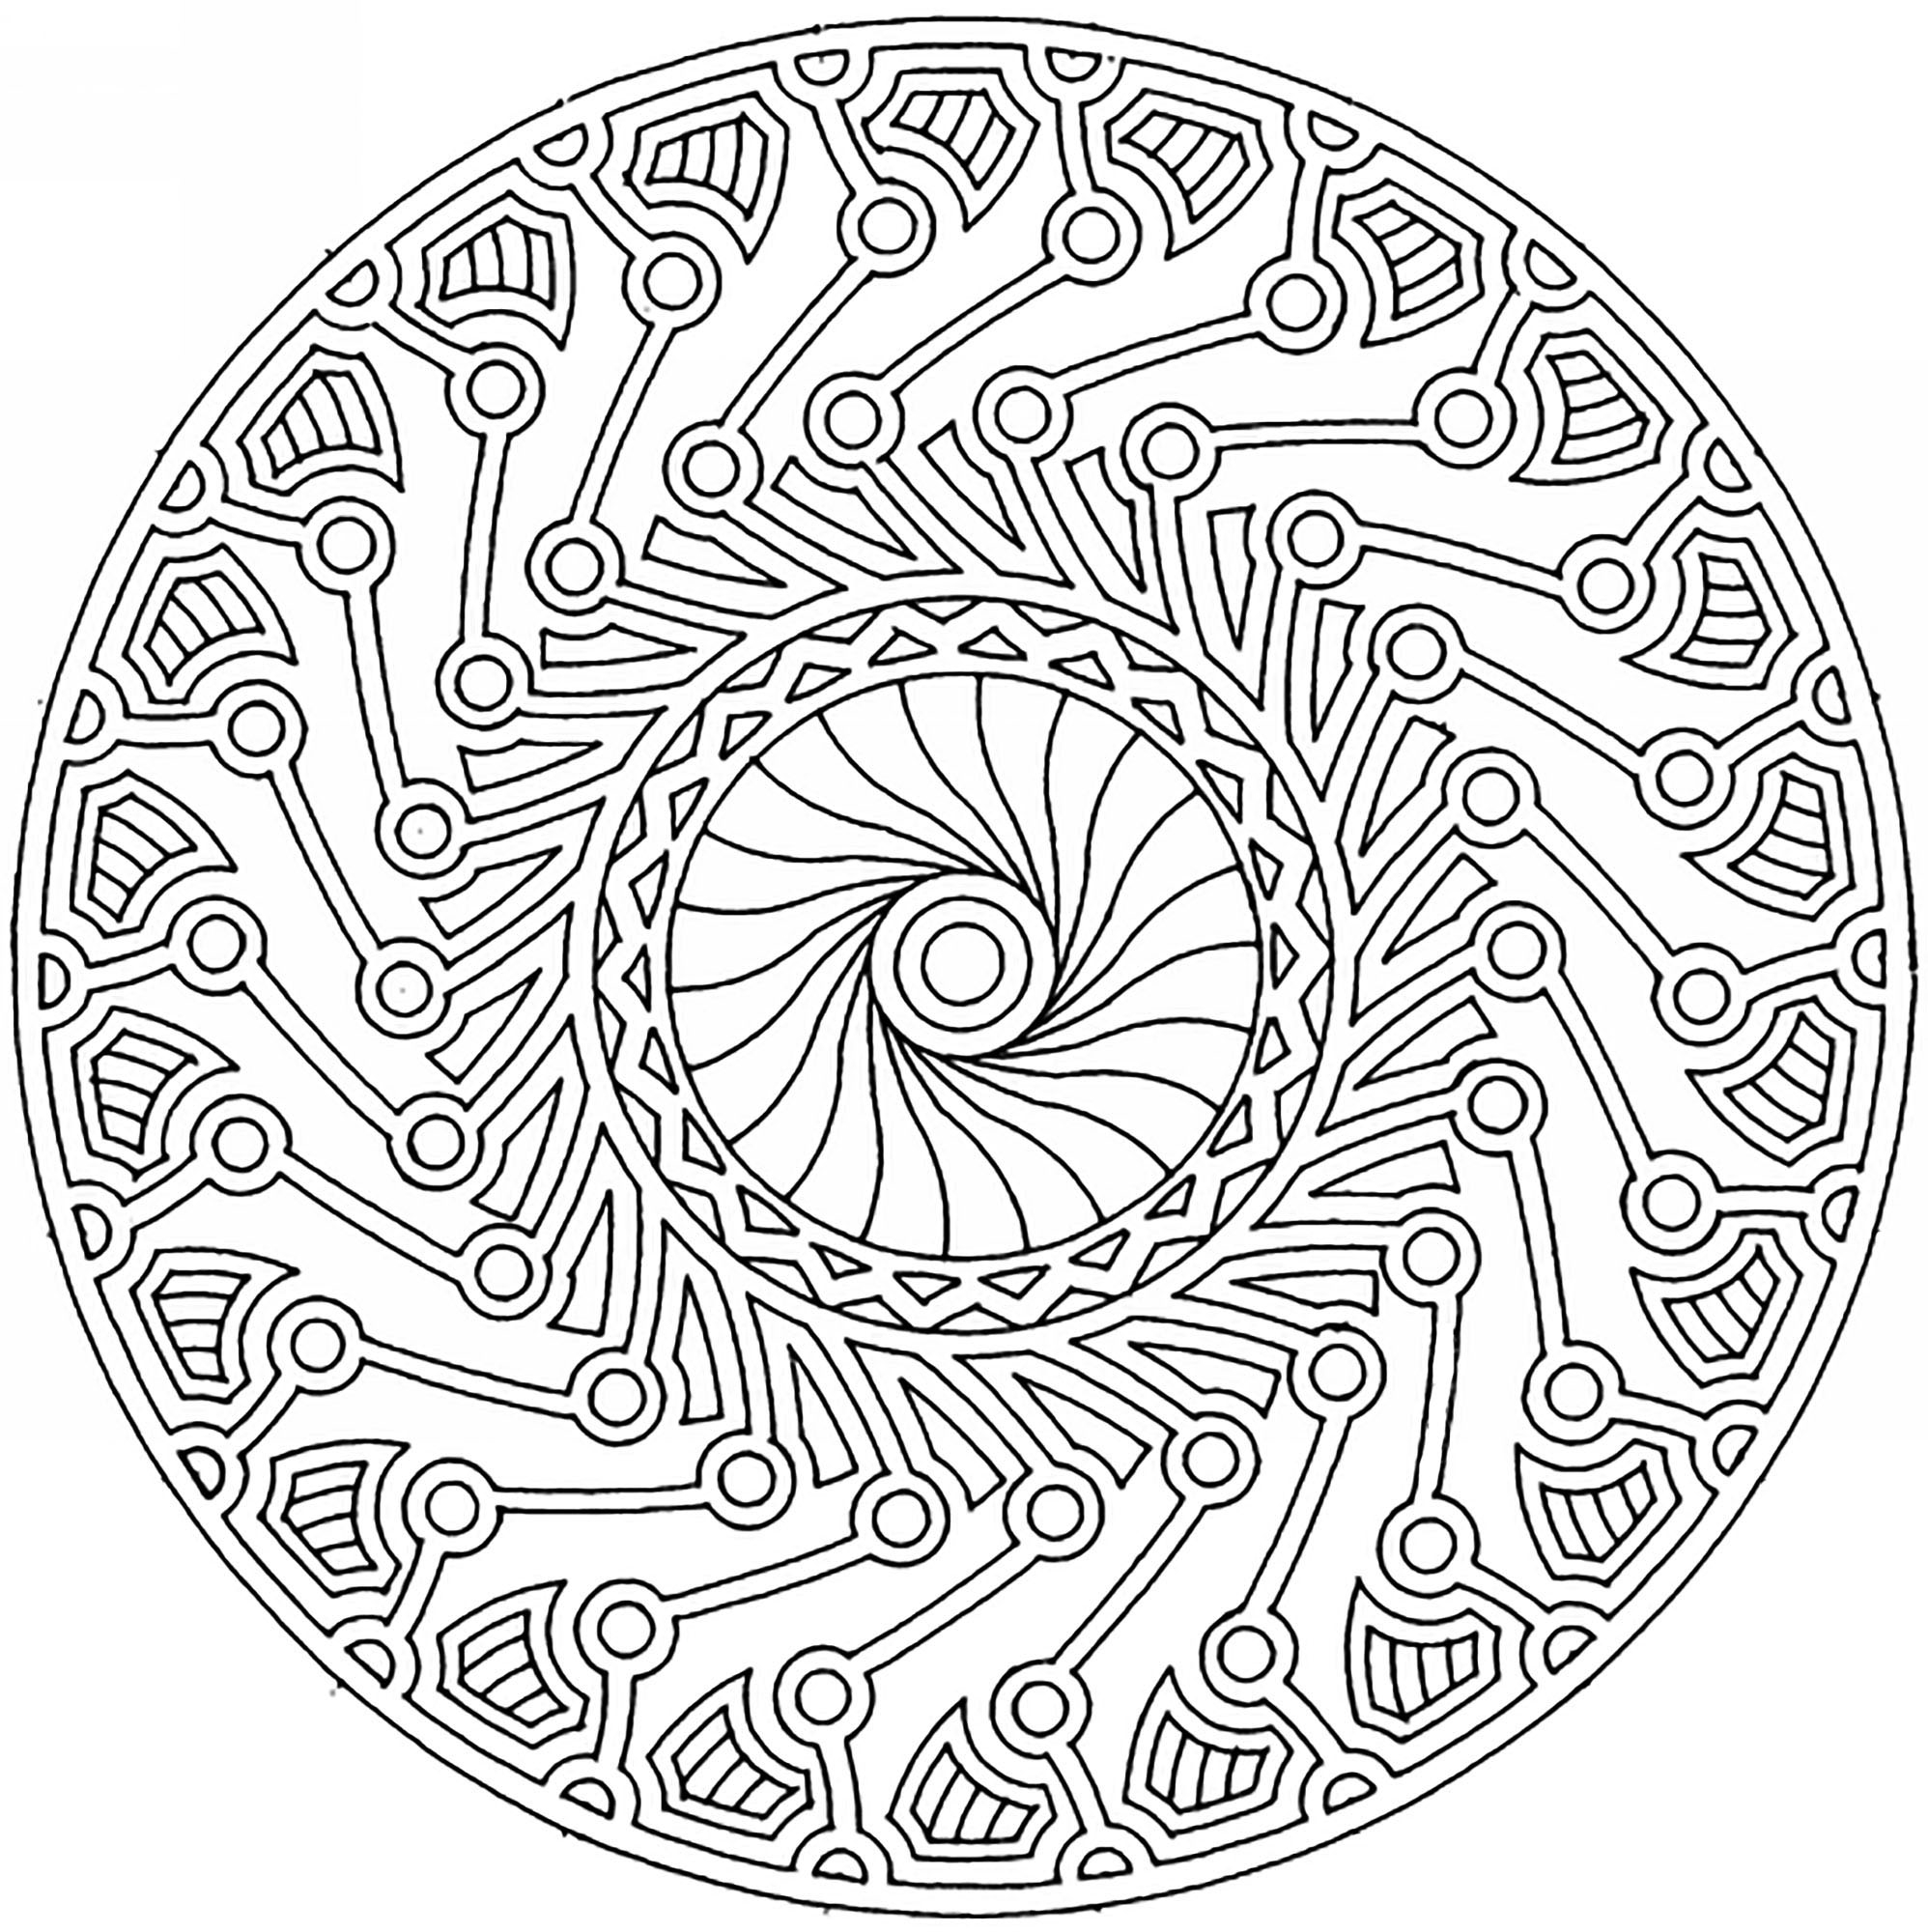 Free Printable Mandala Coloring Pages Adults Mandala Harmony And Complexity Difficult Mandalas For Adults